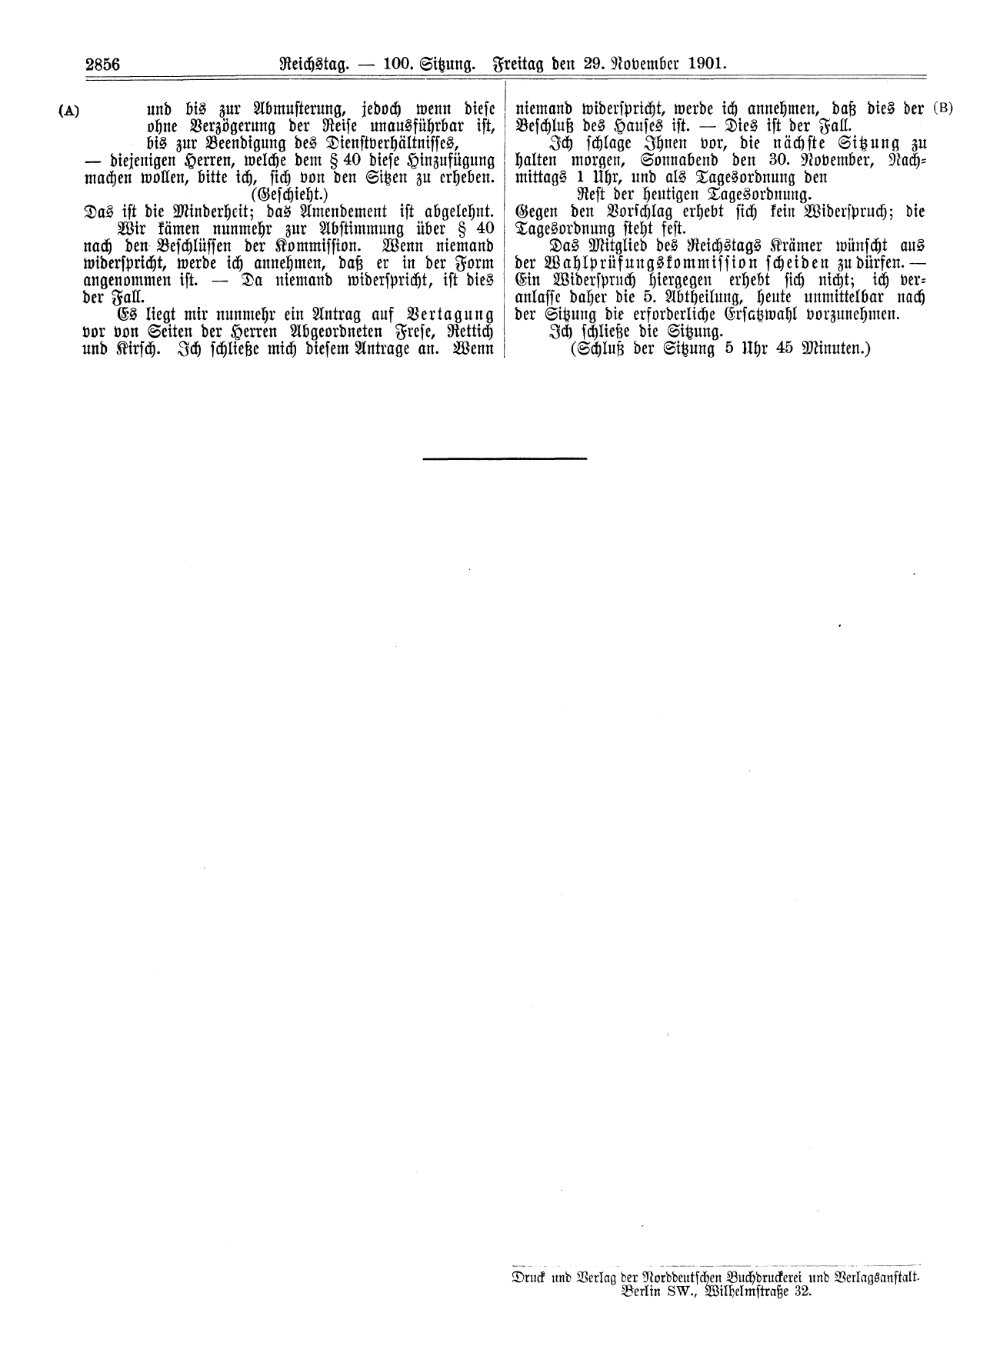 Scan of page 2856